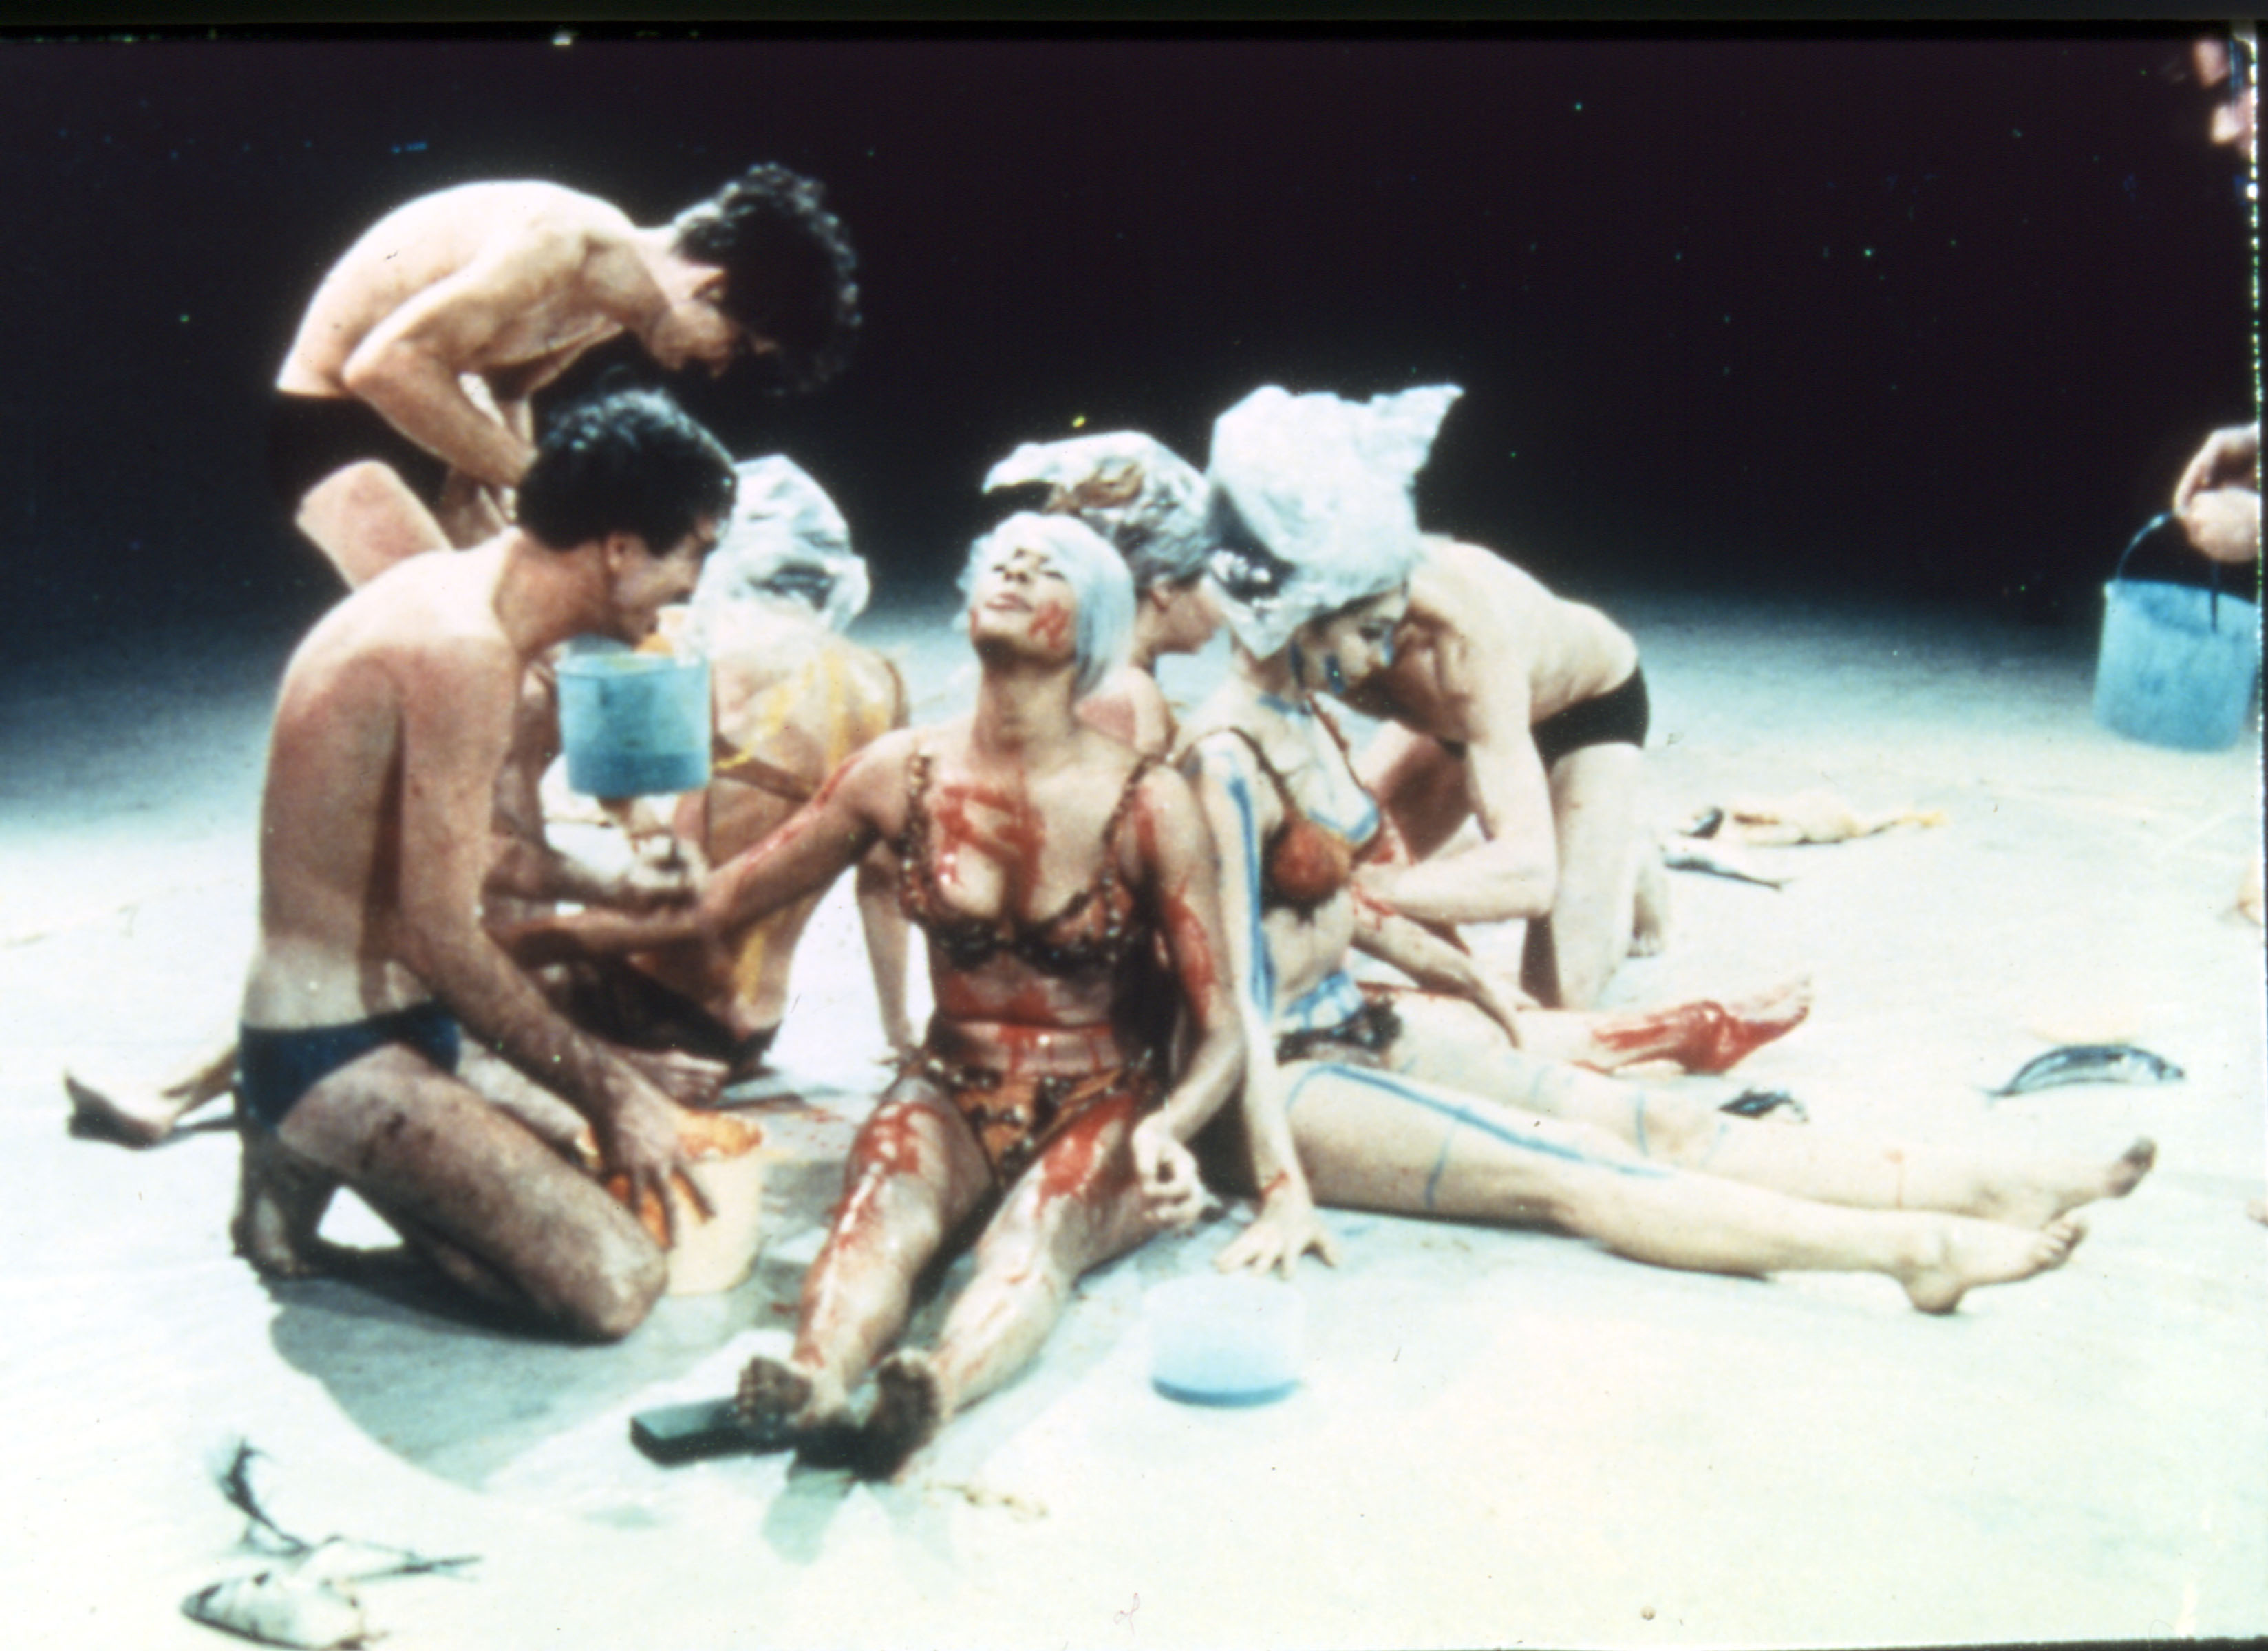 Four female performers sit in their underwear covered in paint and blood and three male performers are crouched facing them.